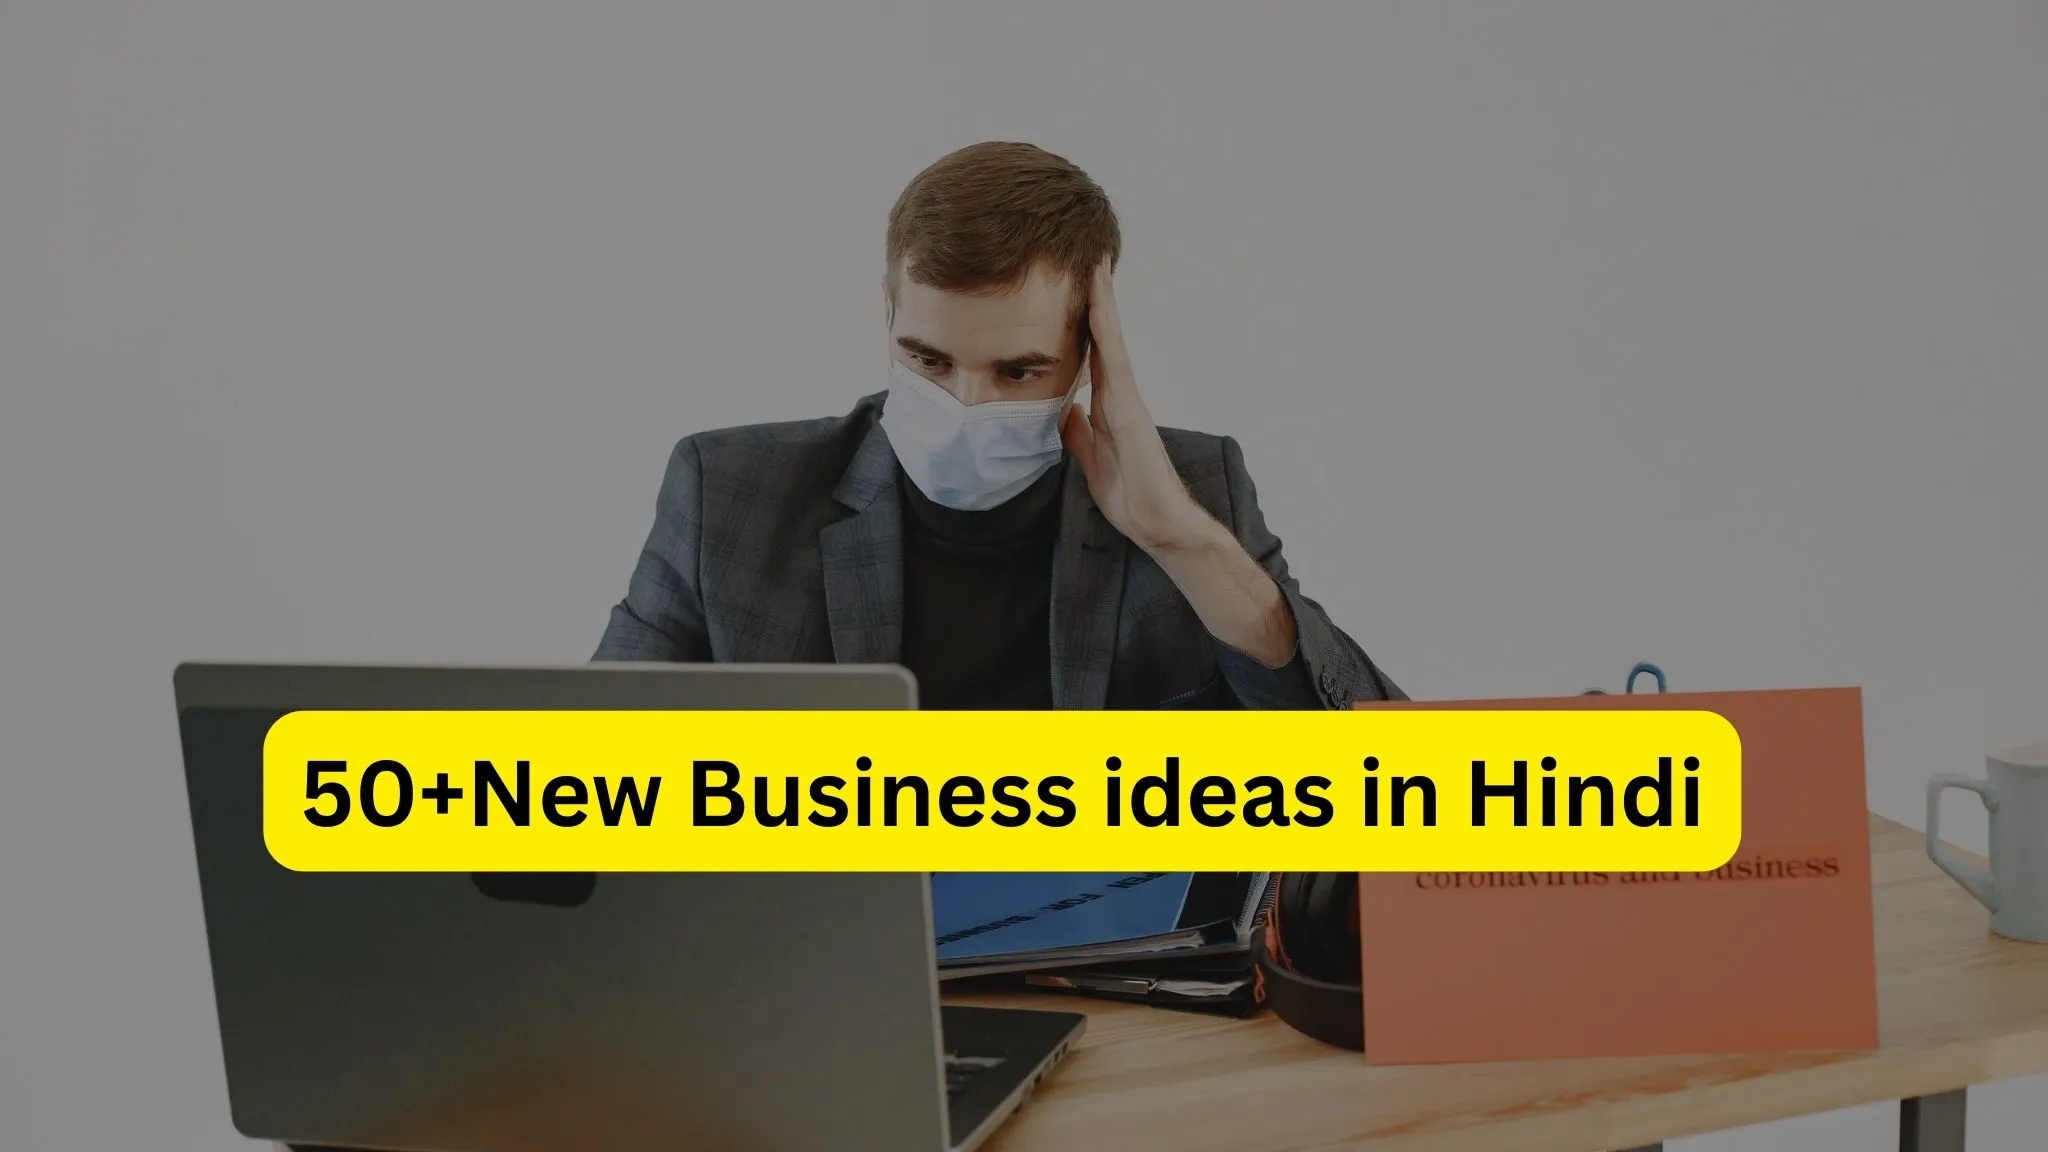 Business ideas in Hindi